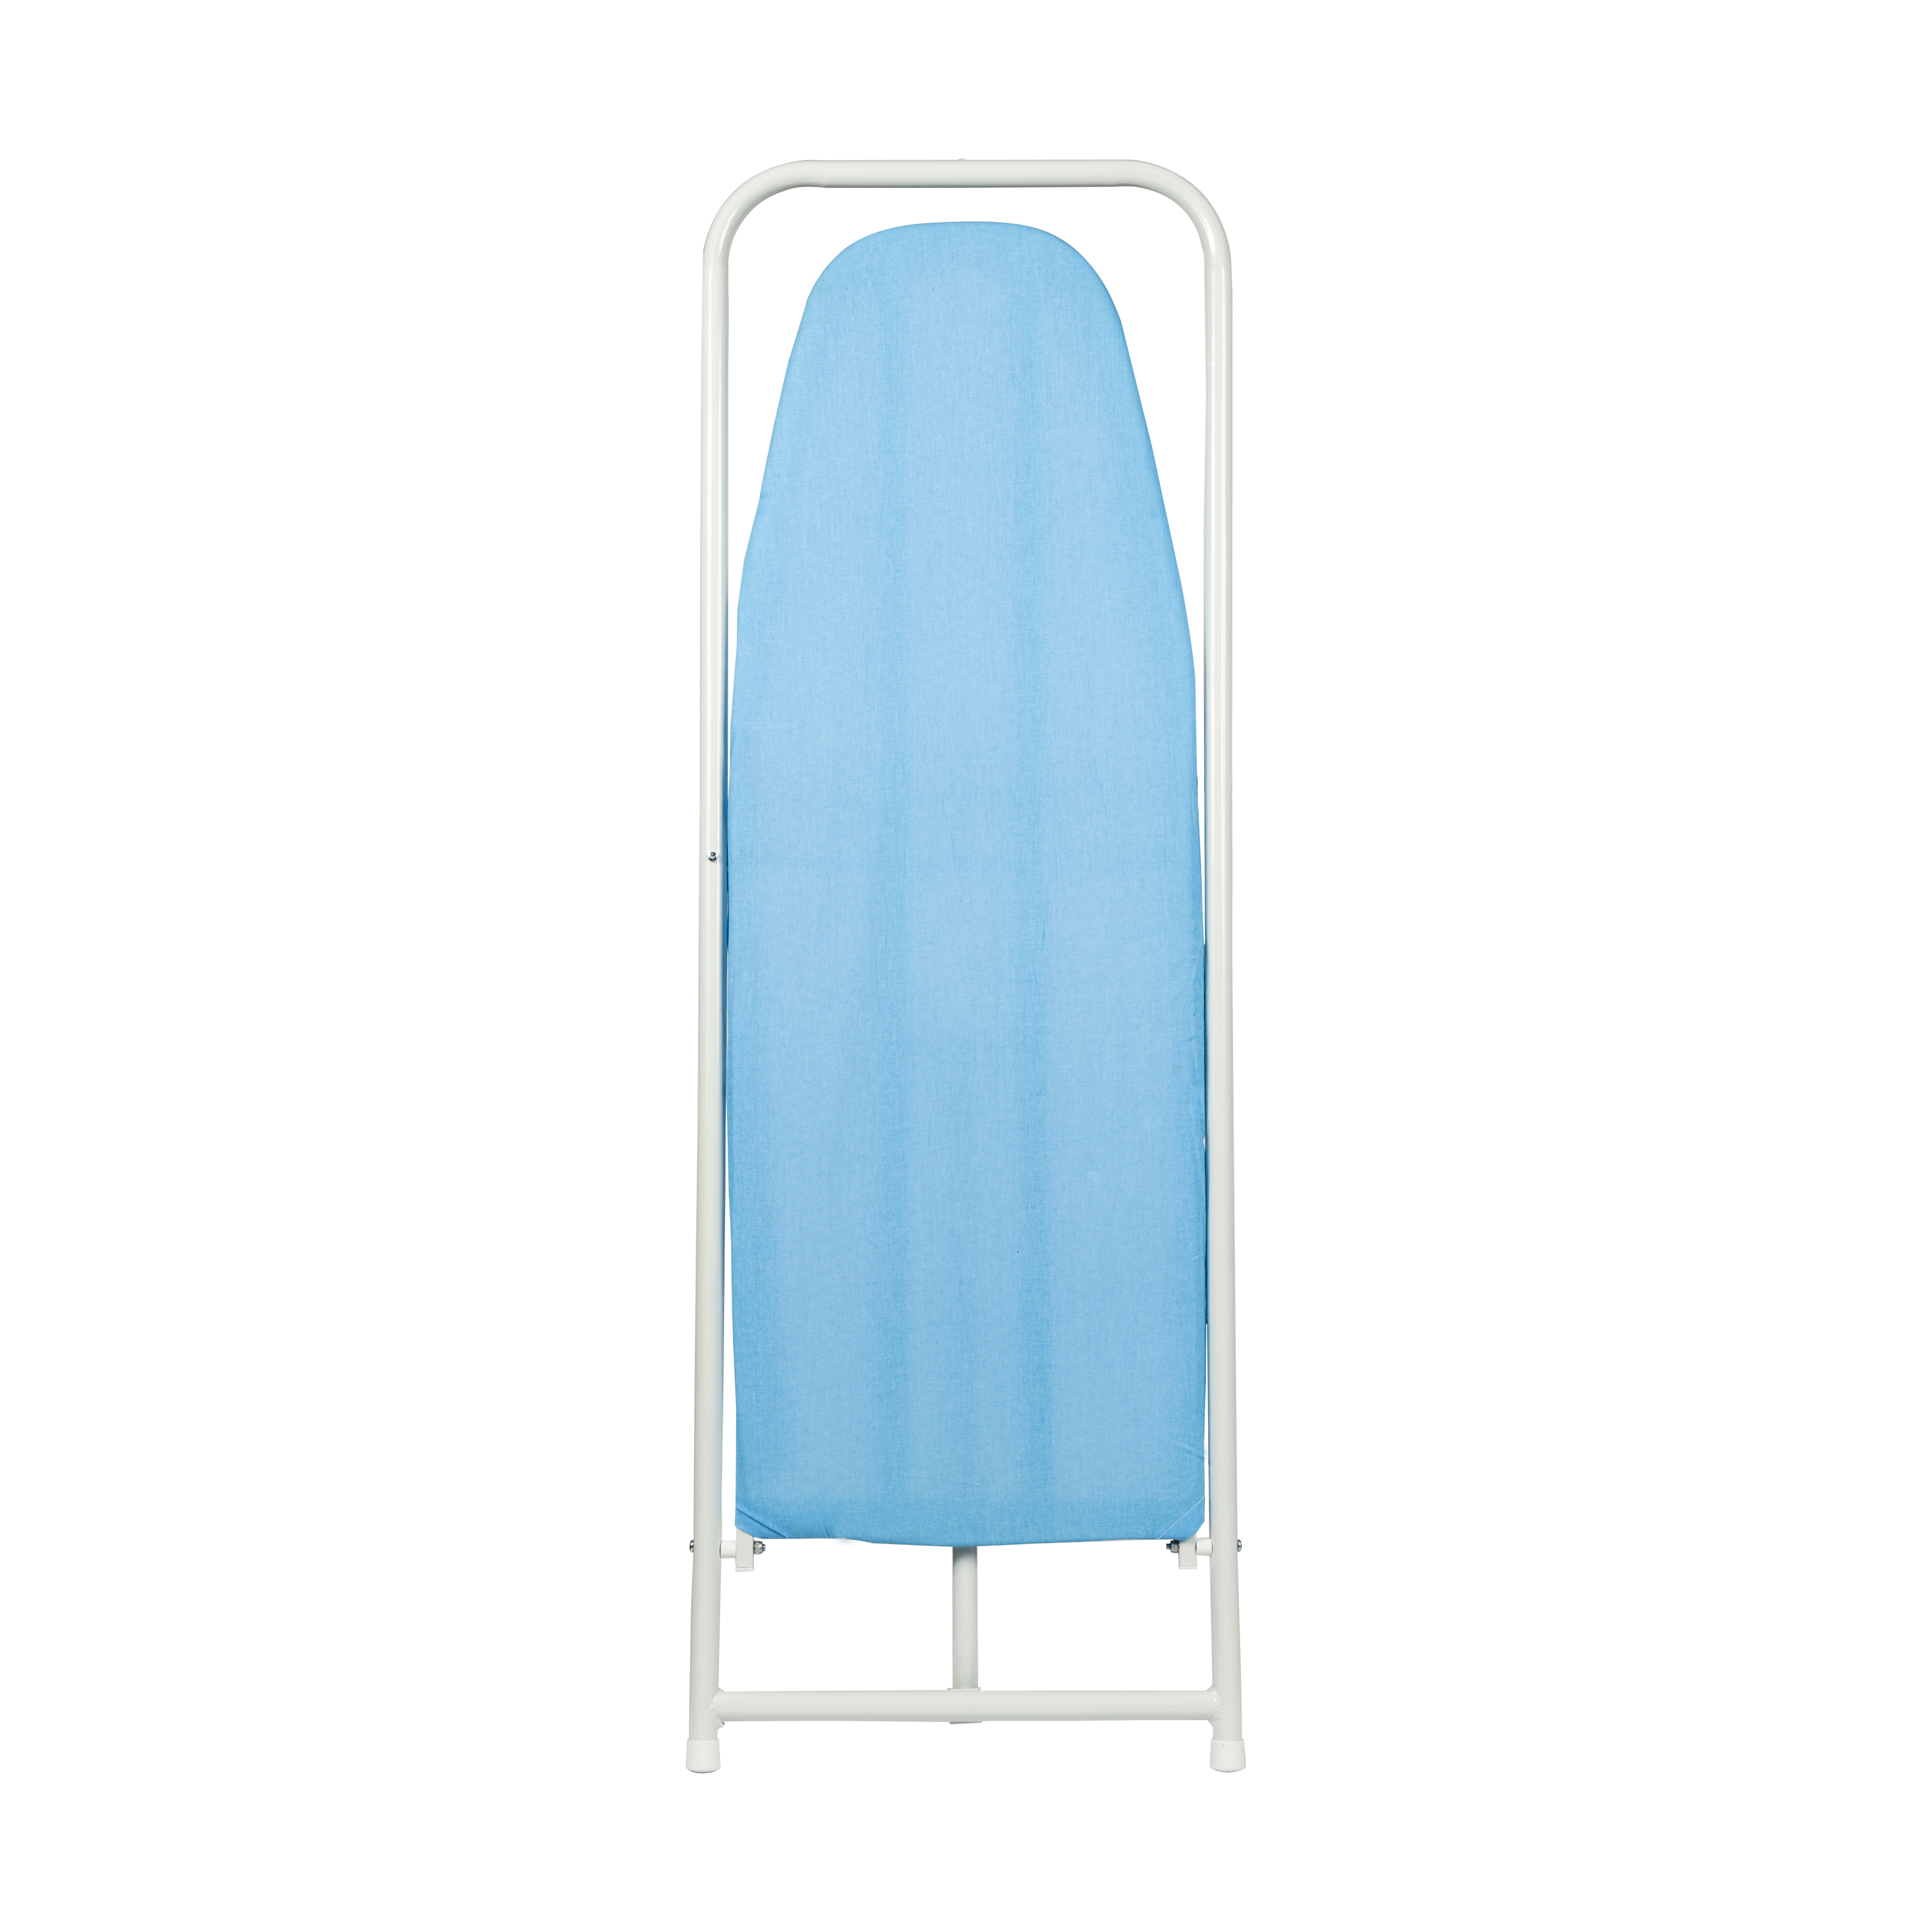 Honey-Can-Do Blue and White Hanging Over-The-Door Ironing Board - image 5 of 9